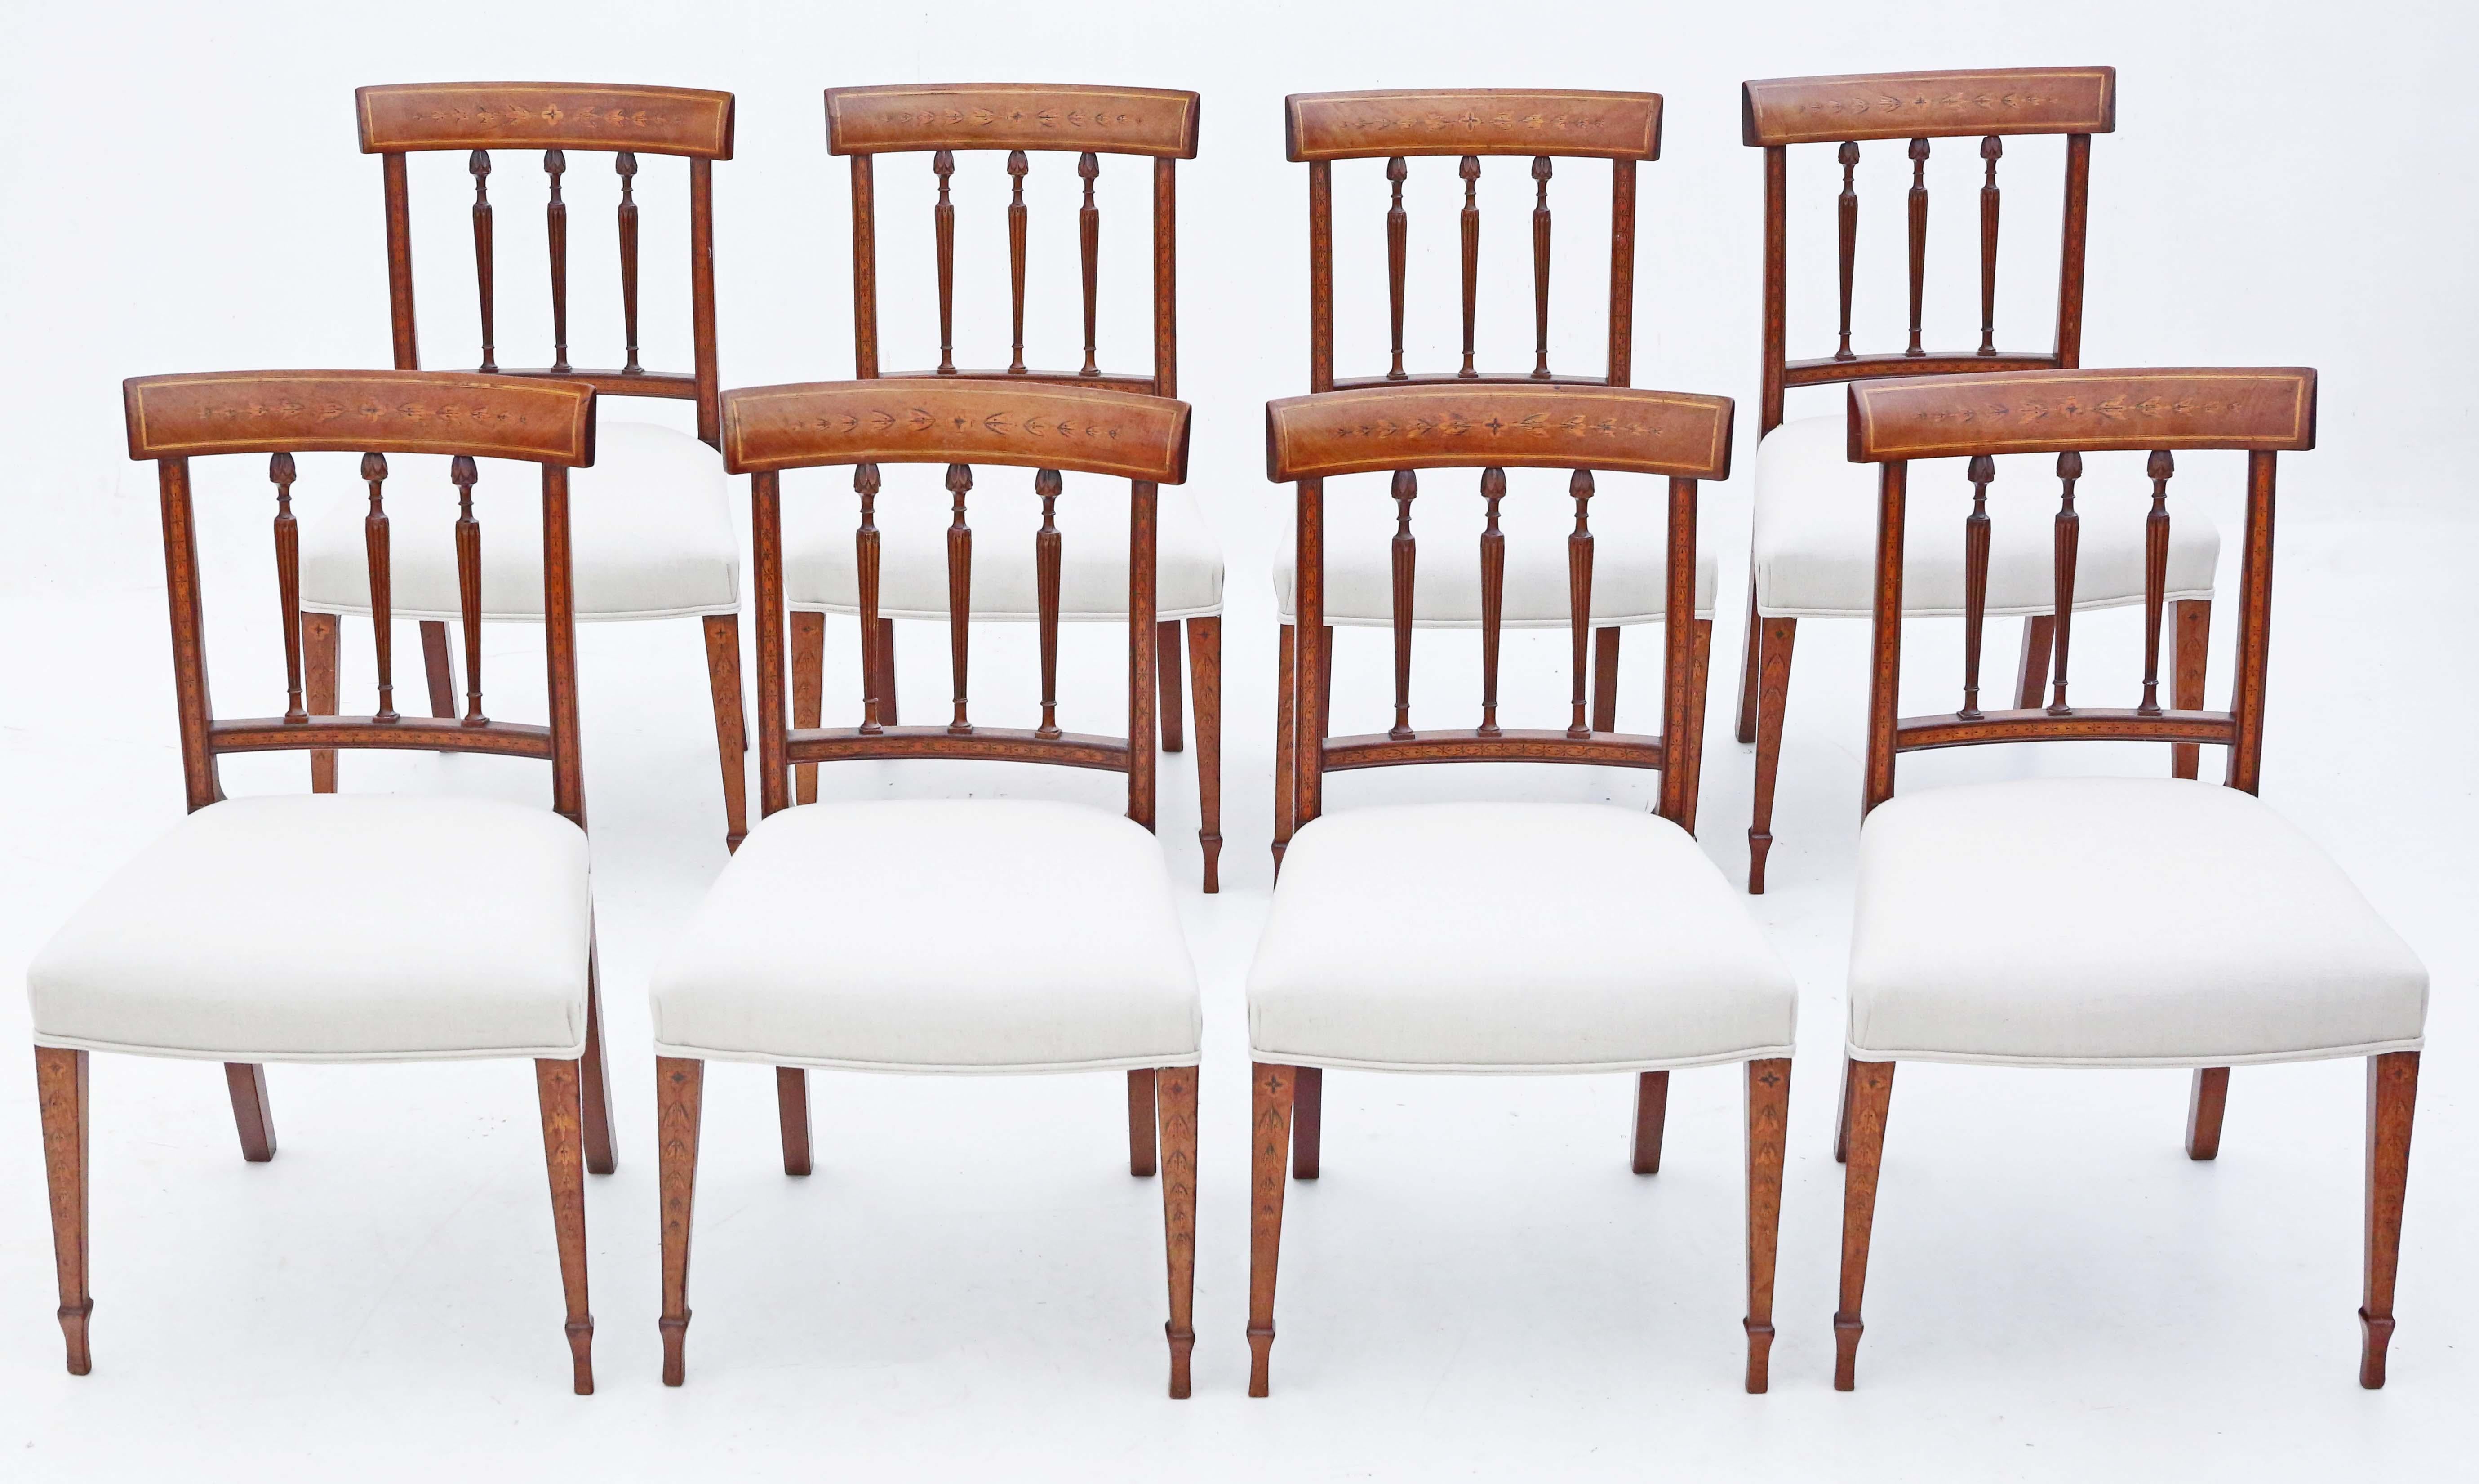 Discover the exquisite craftsmanship of this rare set of 8 mahogany marquetry dining chairs from the early 19th Century. These chairs boast a simple yet elegant design that exudes sophistication and timeless appeal.

Crafted with meticulous